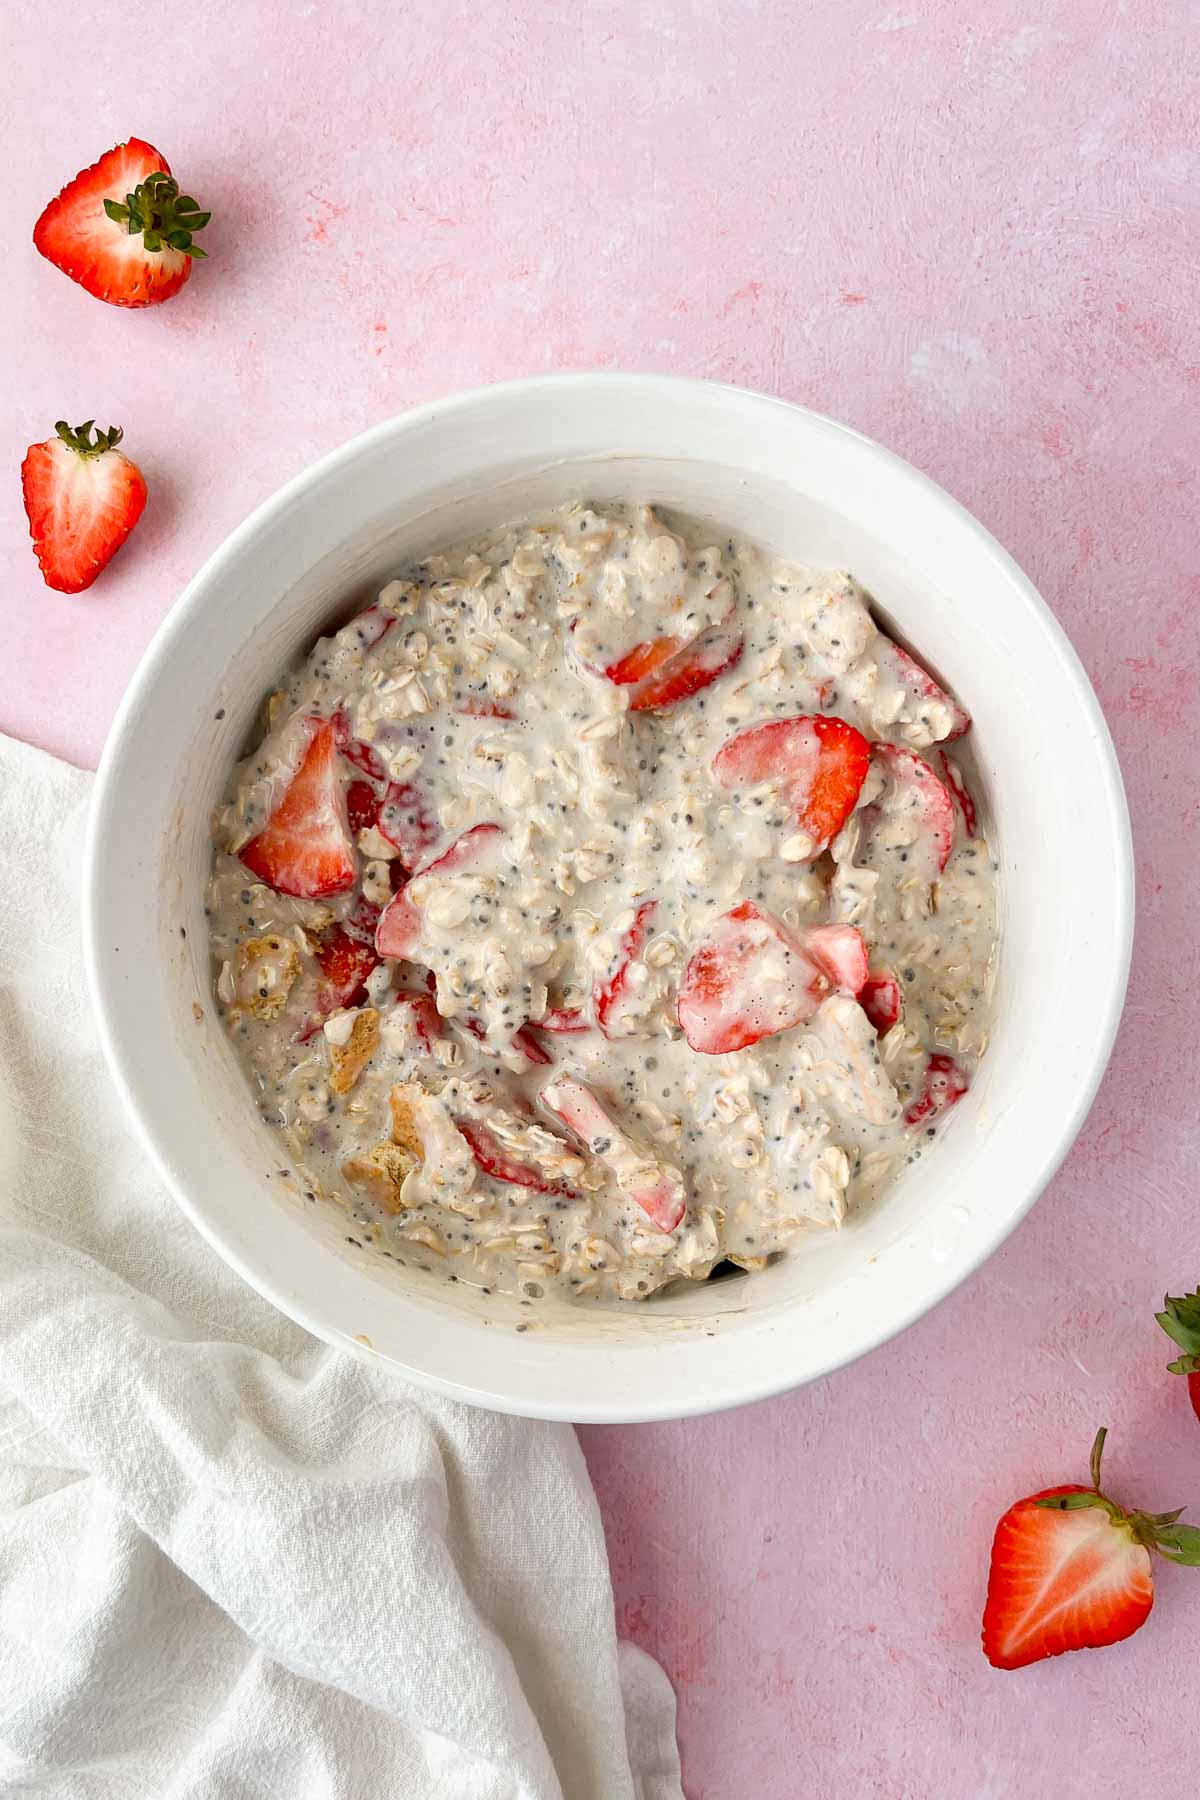 strawberry cheesecake overnight oats ingredients mixed together in white mixing bowl.